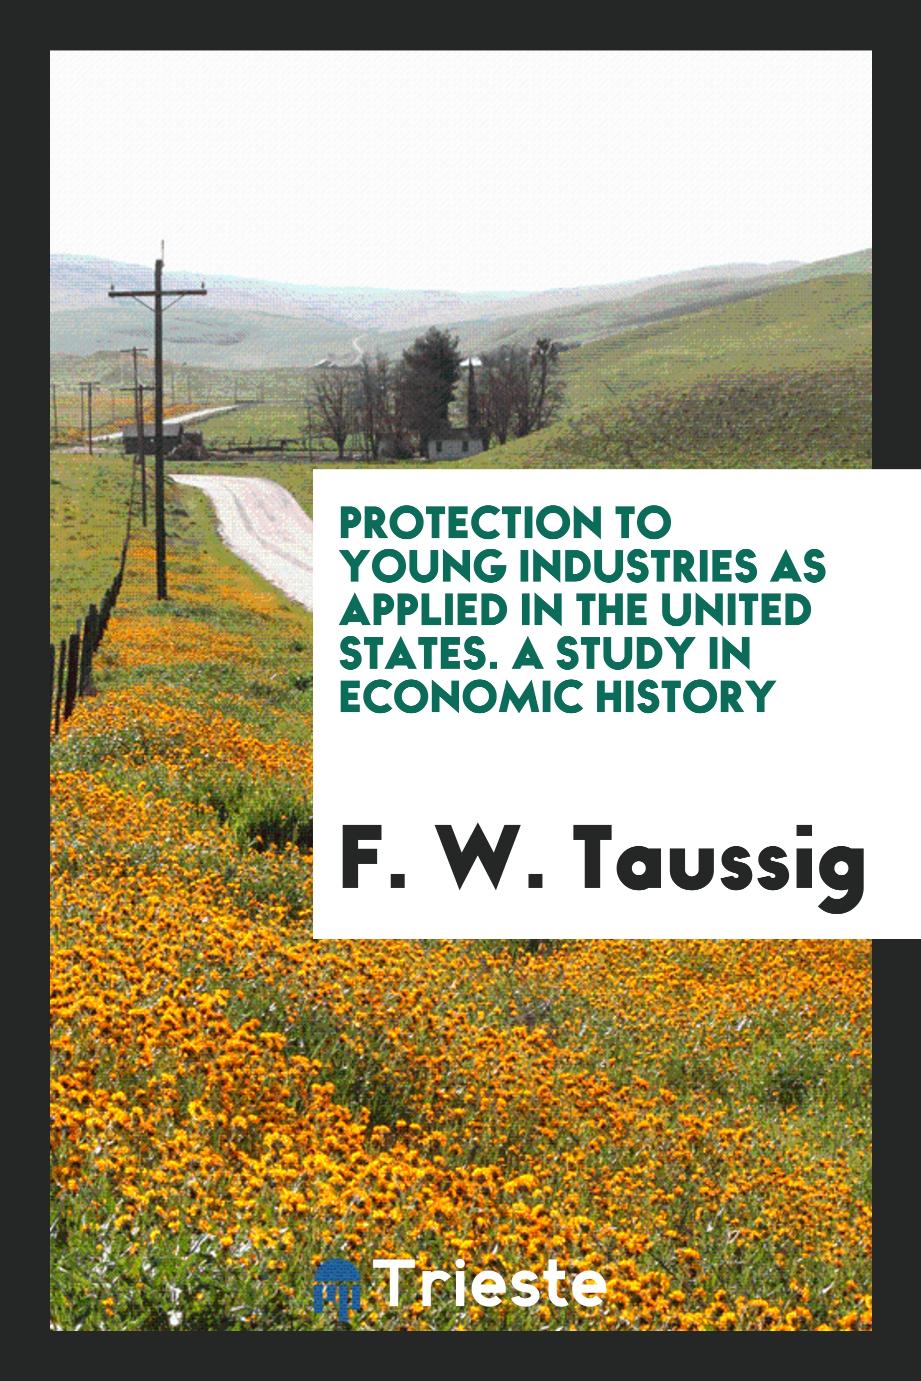 Protection to Young Industries as Applied in the United States. A Study in economic history